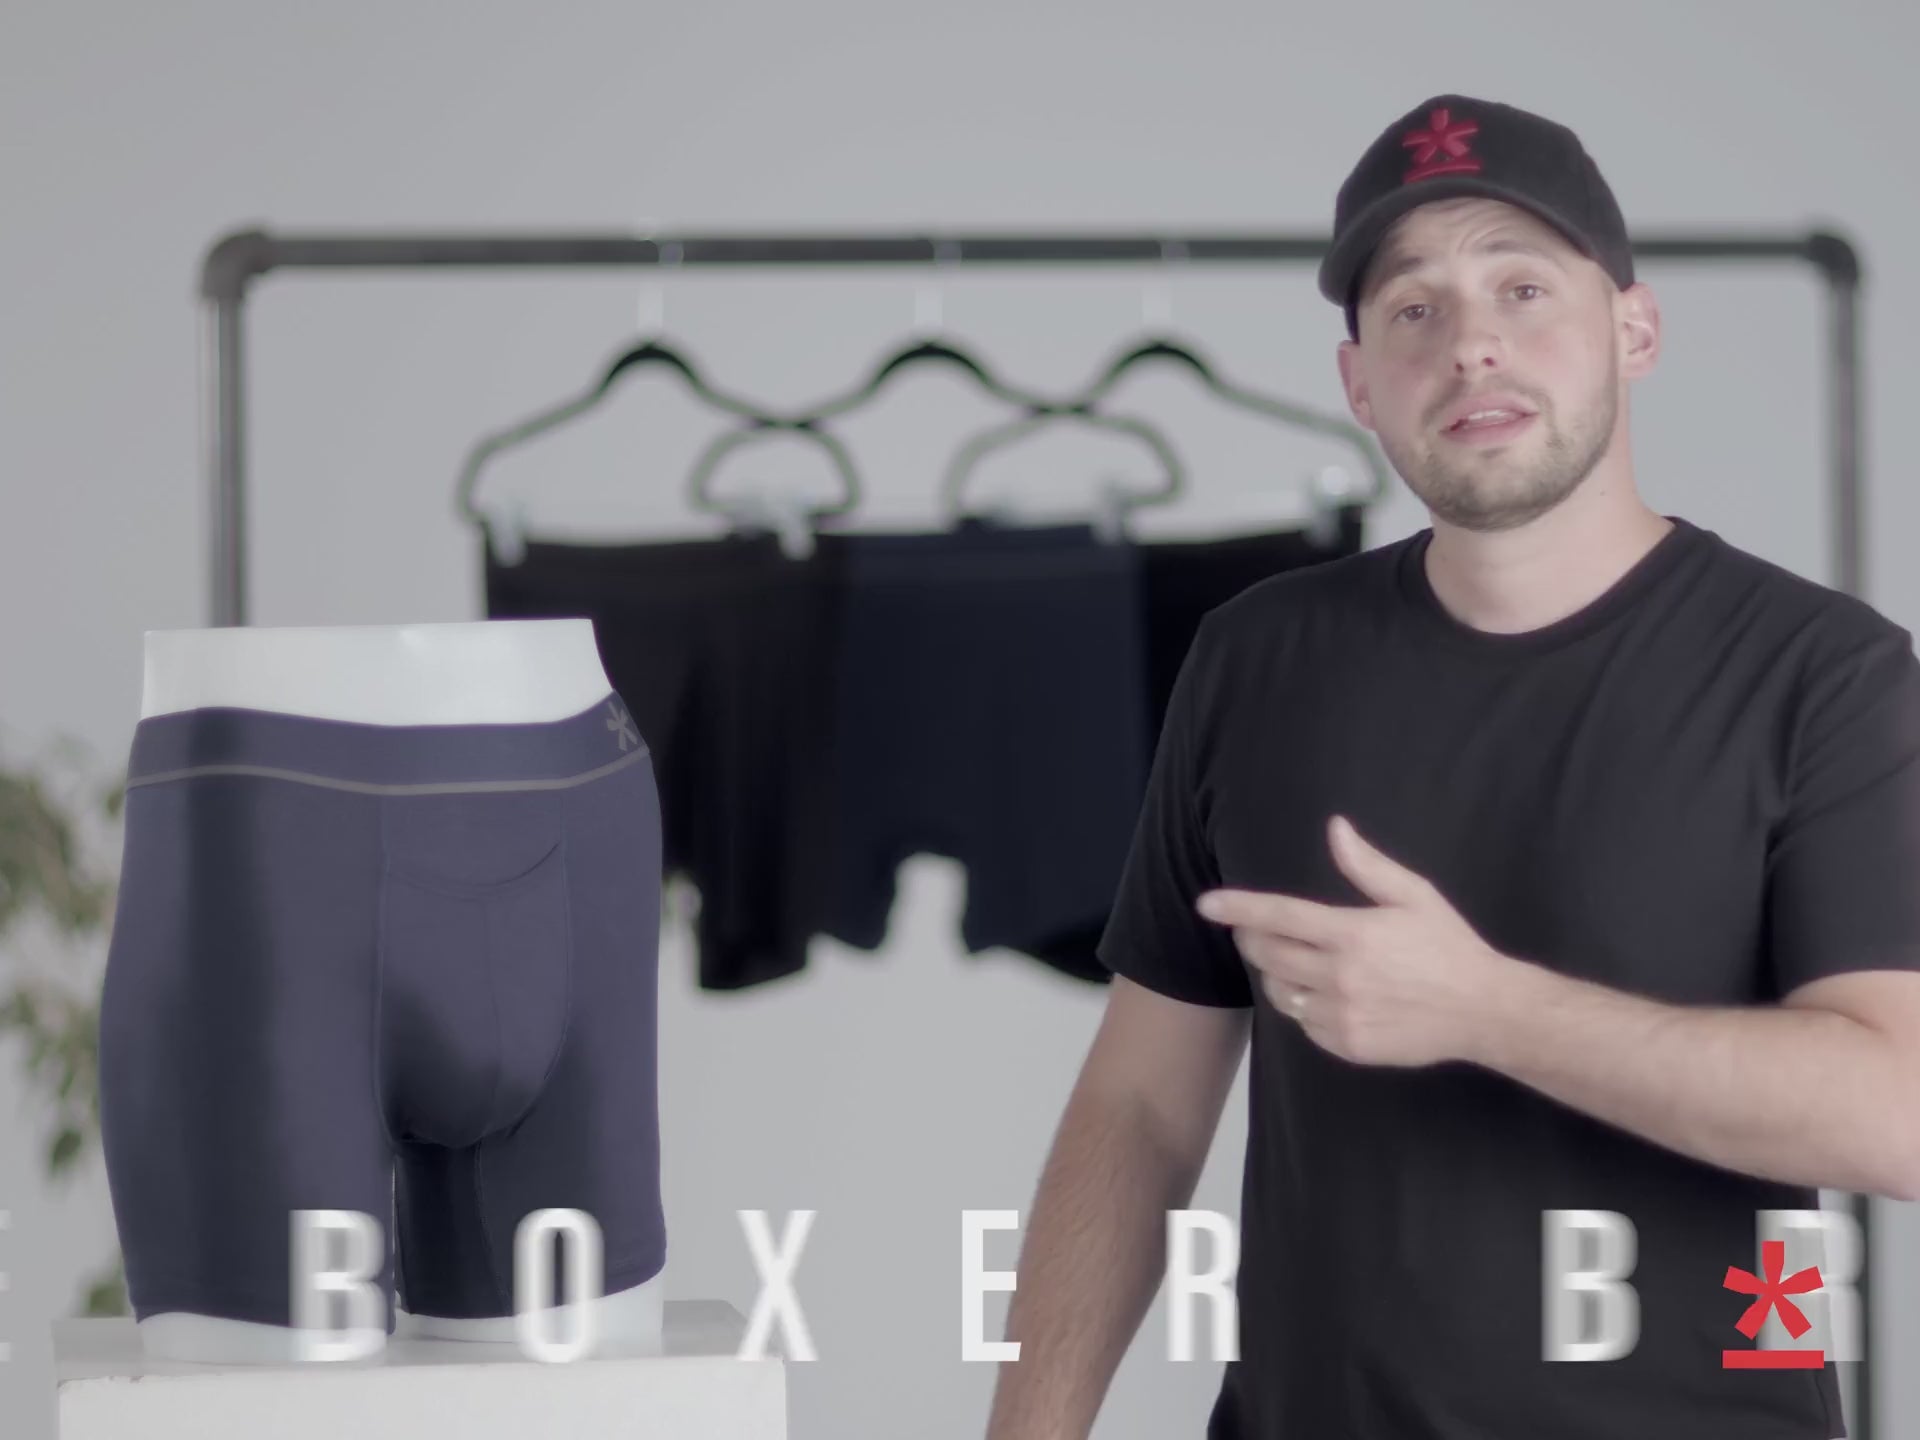 Load video: What The Boxer Brief is made of?